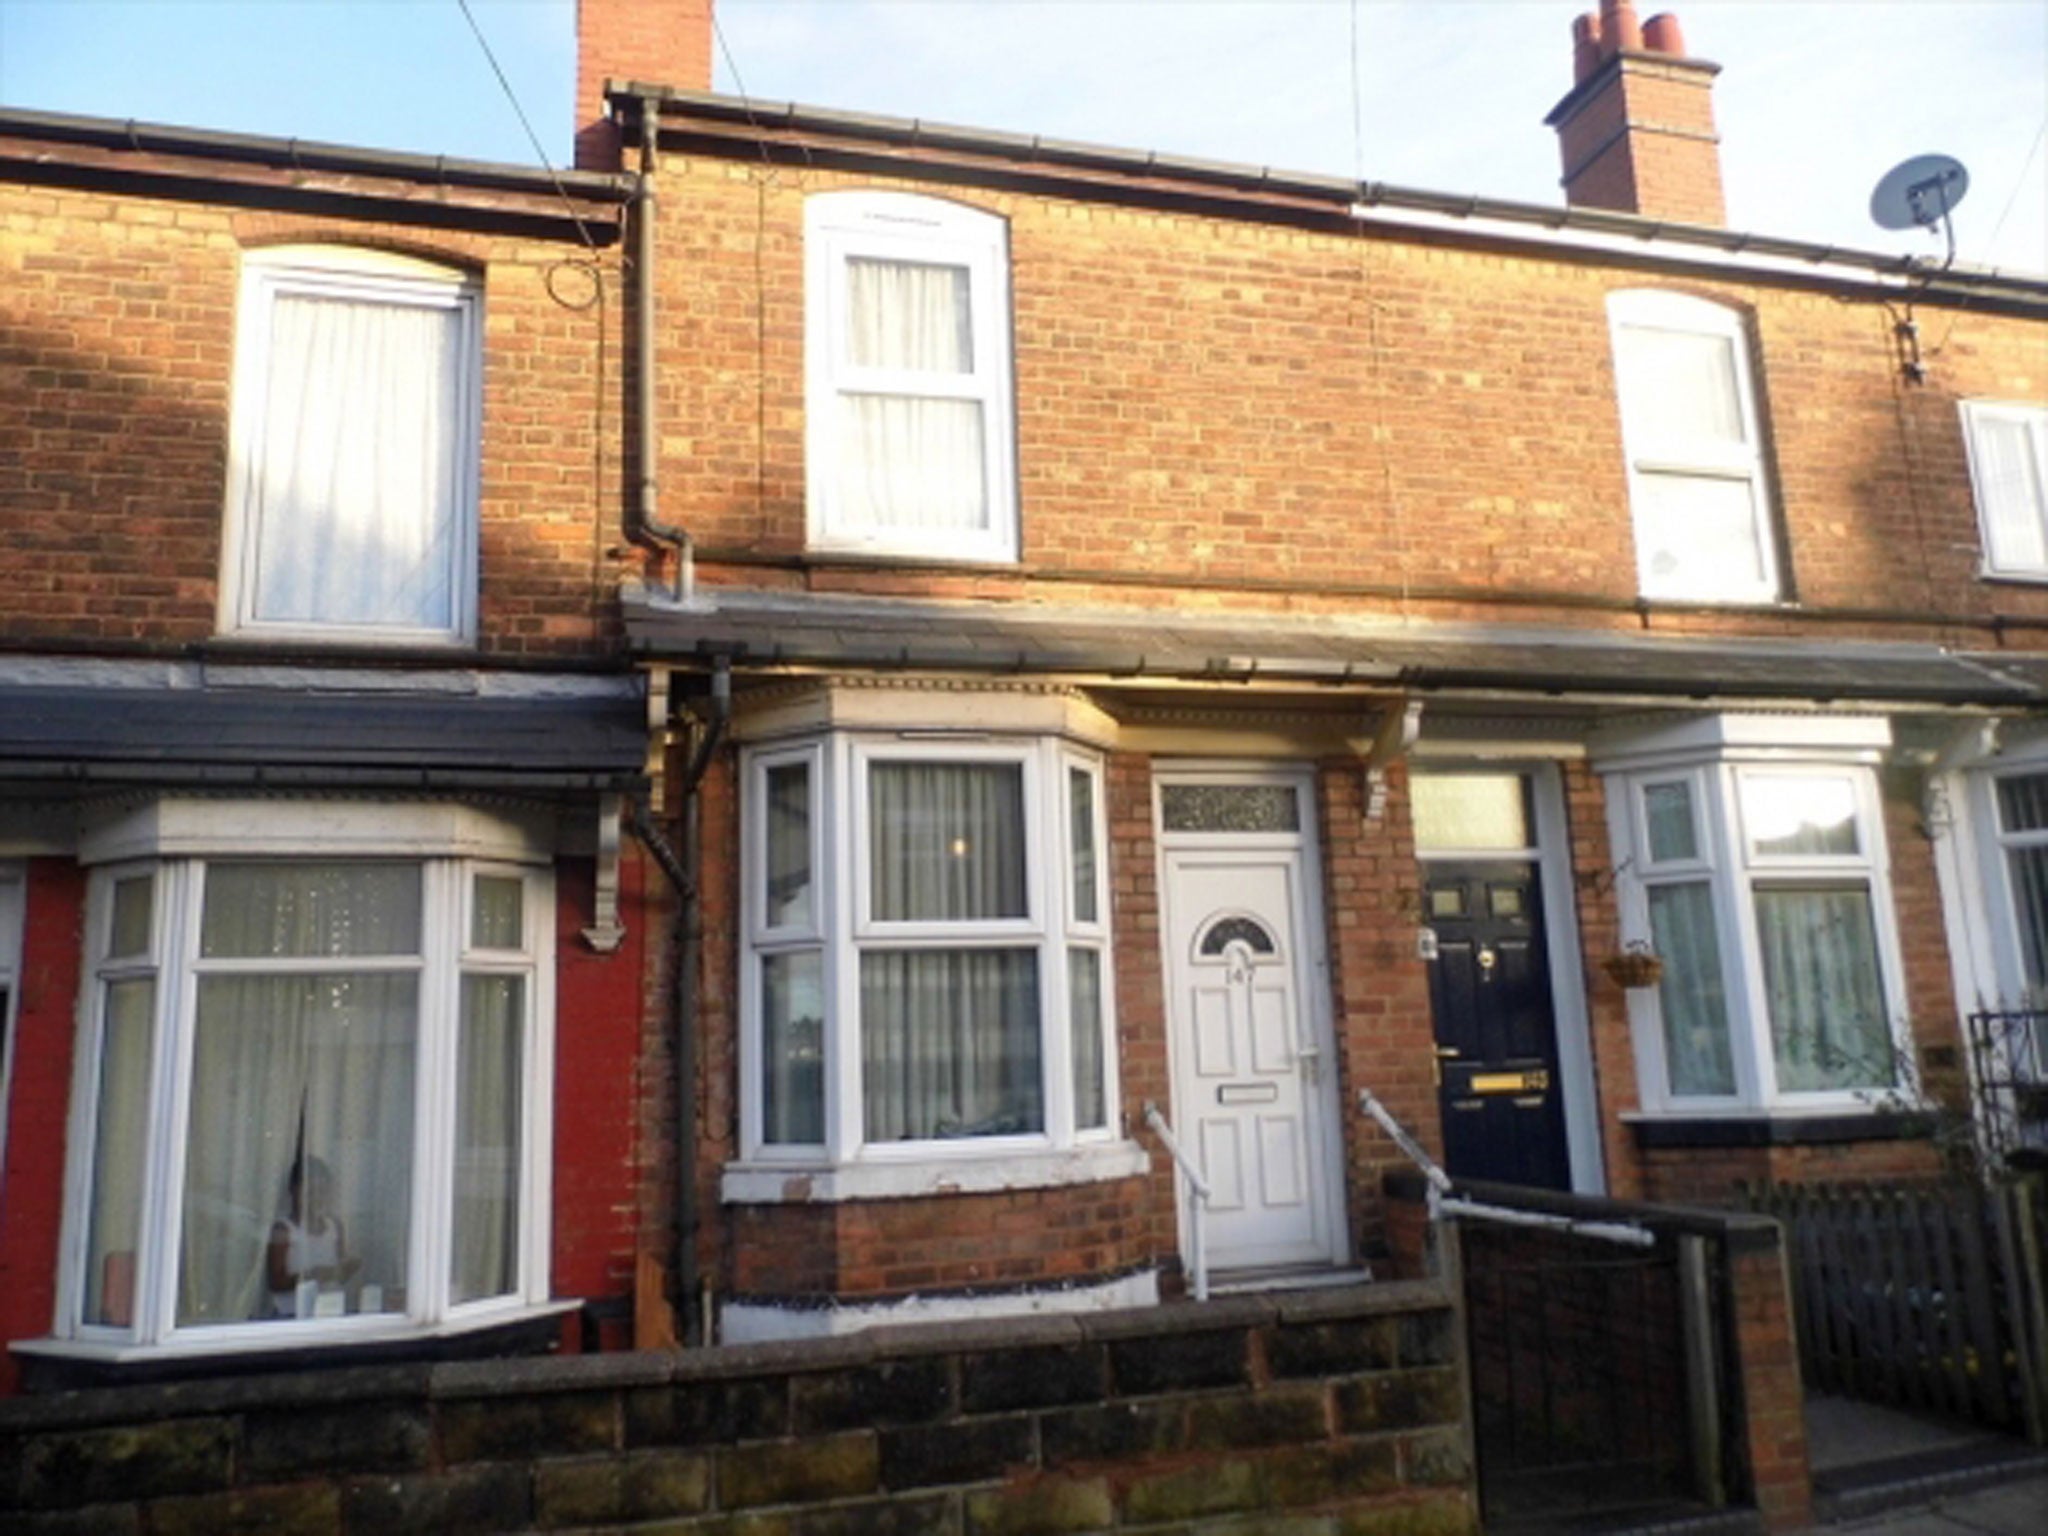 3 bedroom terraced house for sale in James Turner St., Birmingham, West Midlands B18, on with Sprinkbox Properties. Offers over £65,000